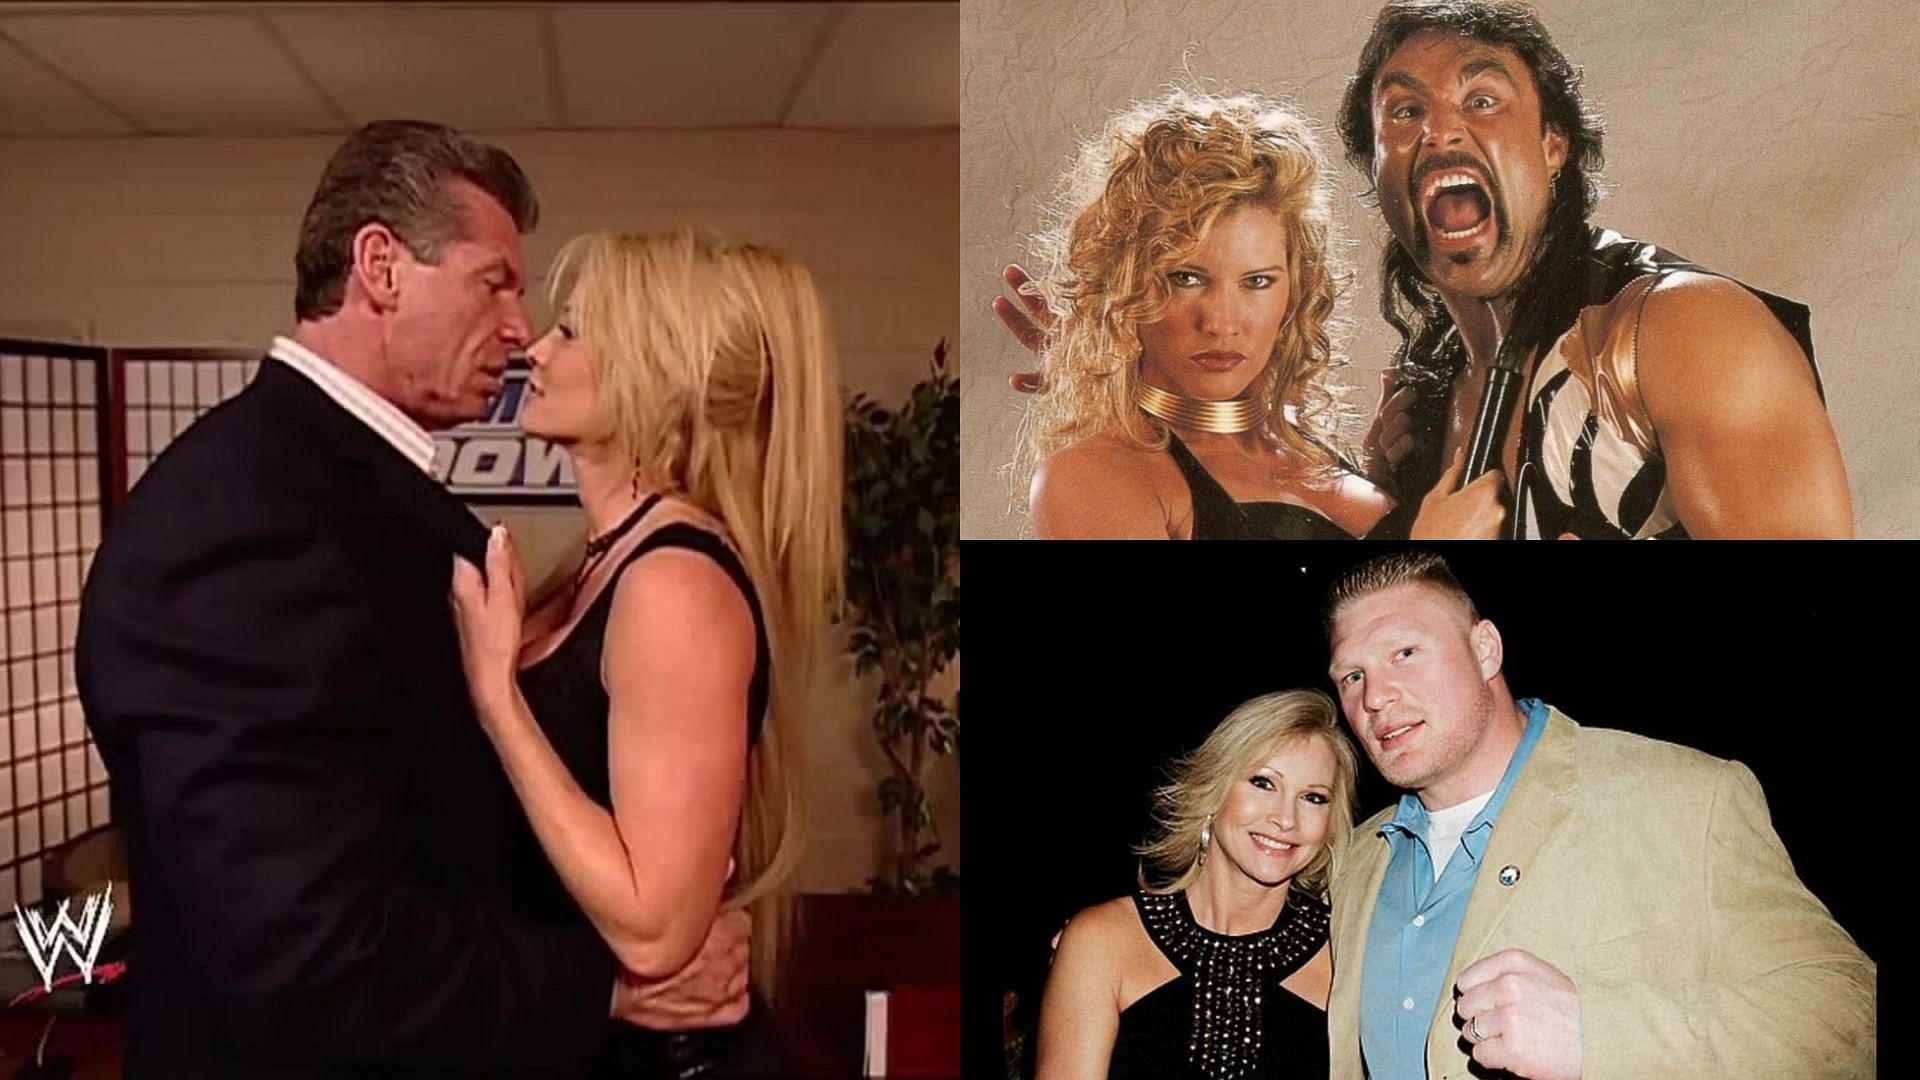 Sable had an on-screen love affair with Vince McMahon in 2003